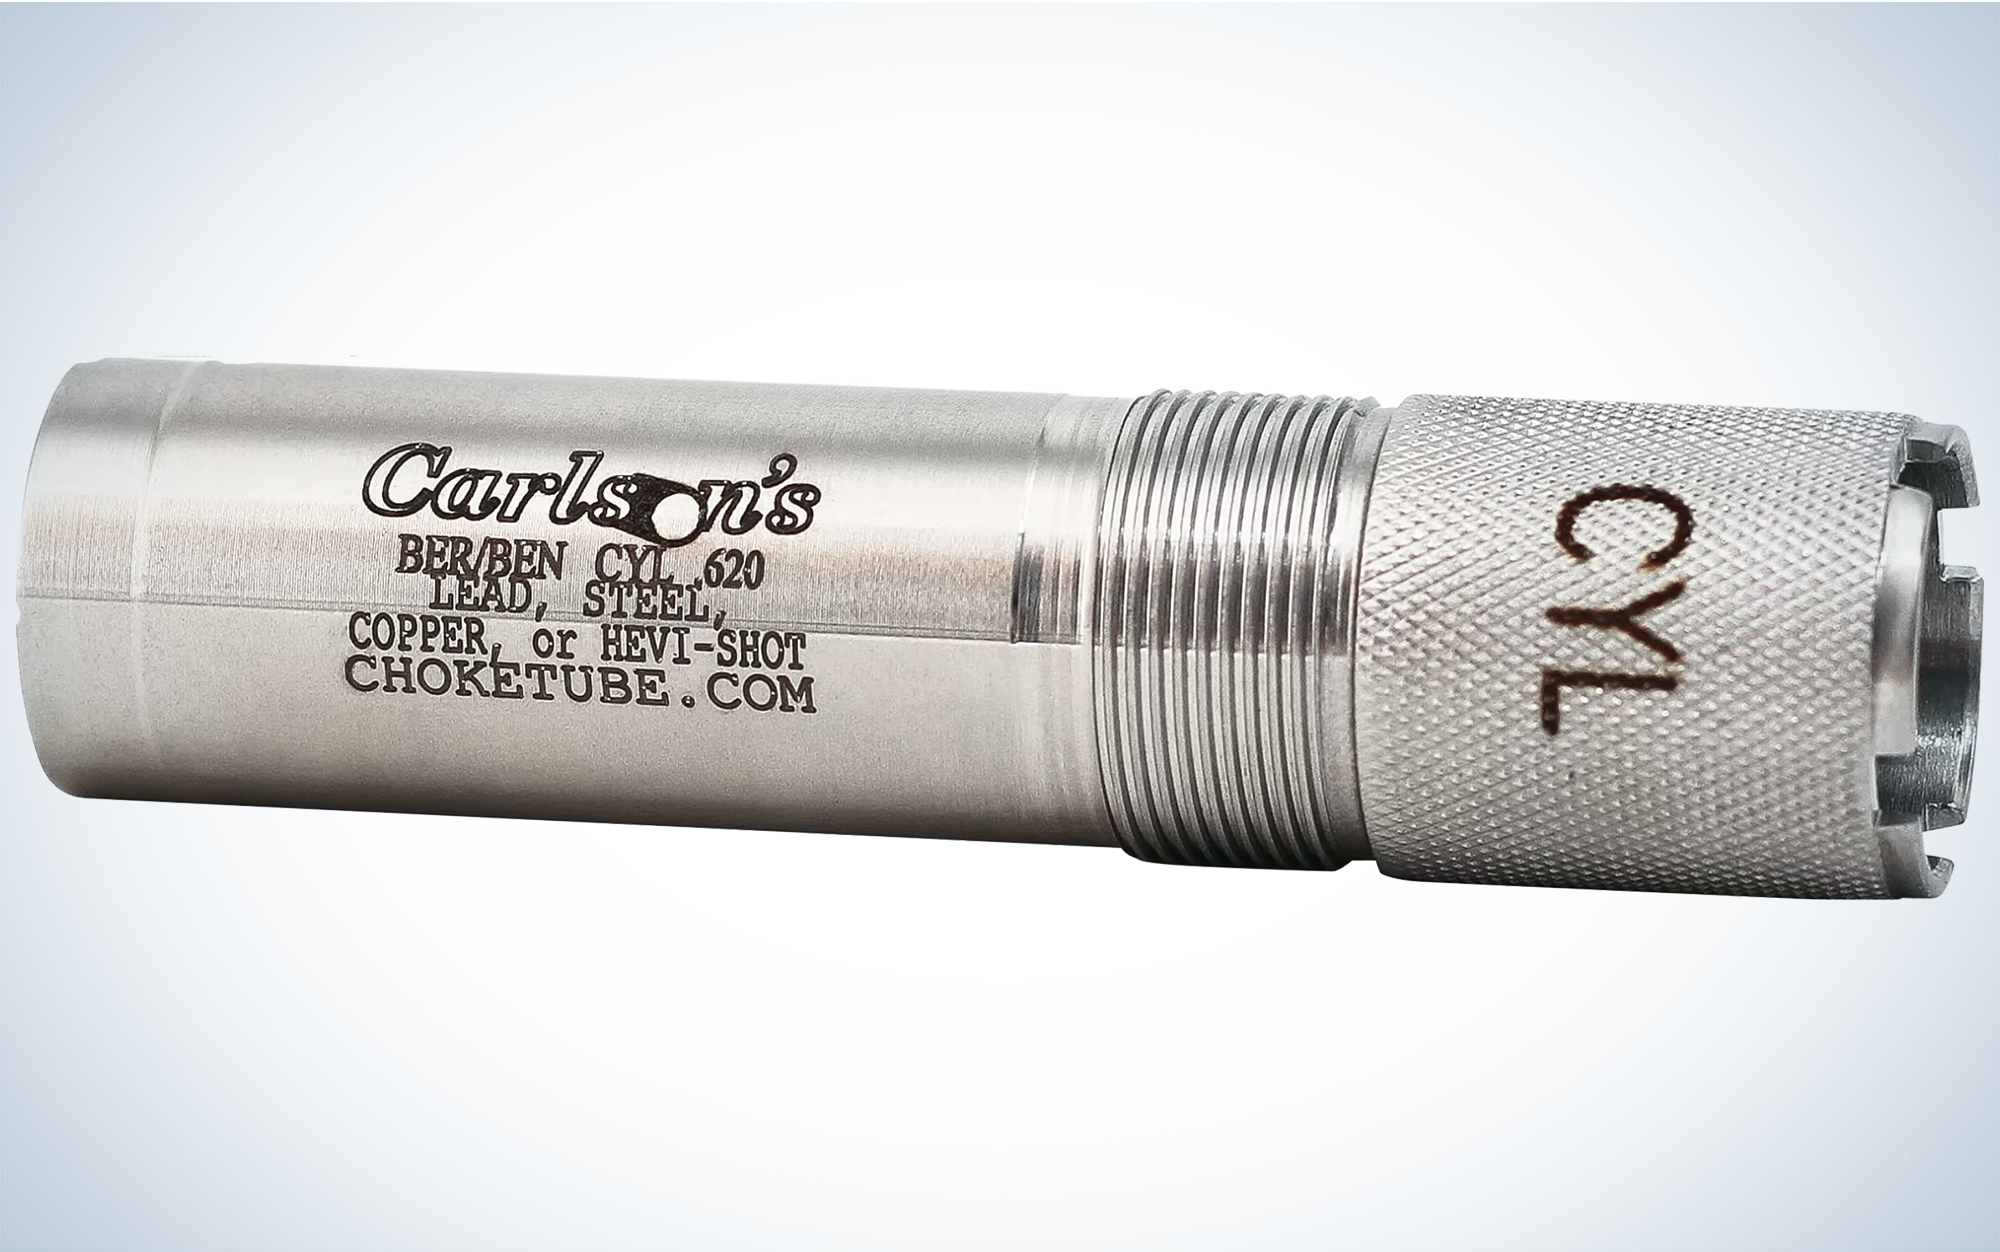 Carlson's is one of the best chokes for sporting clays.